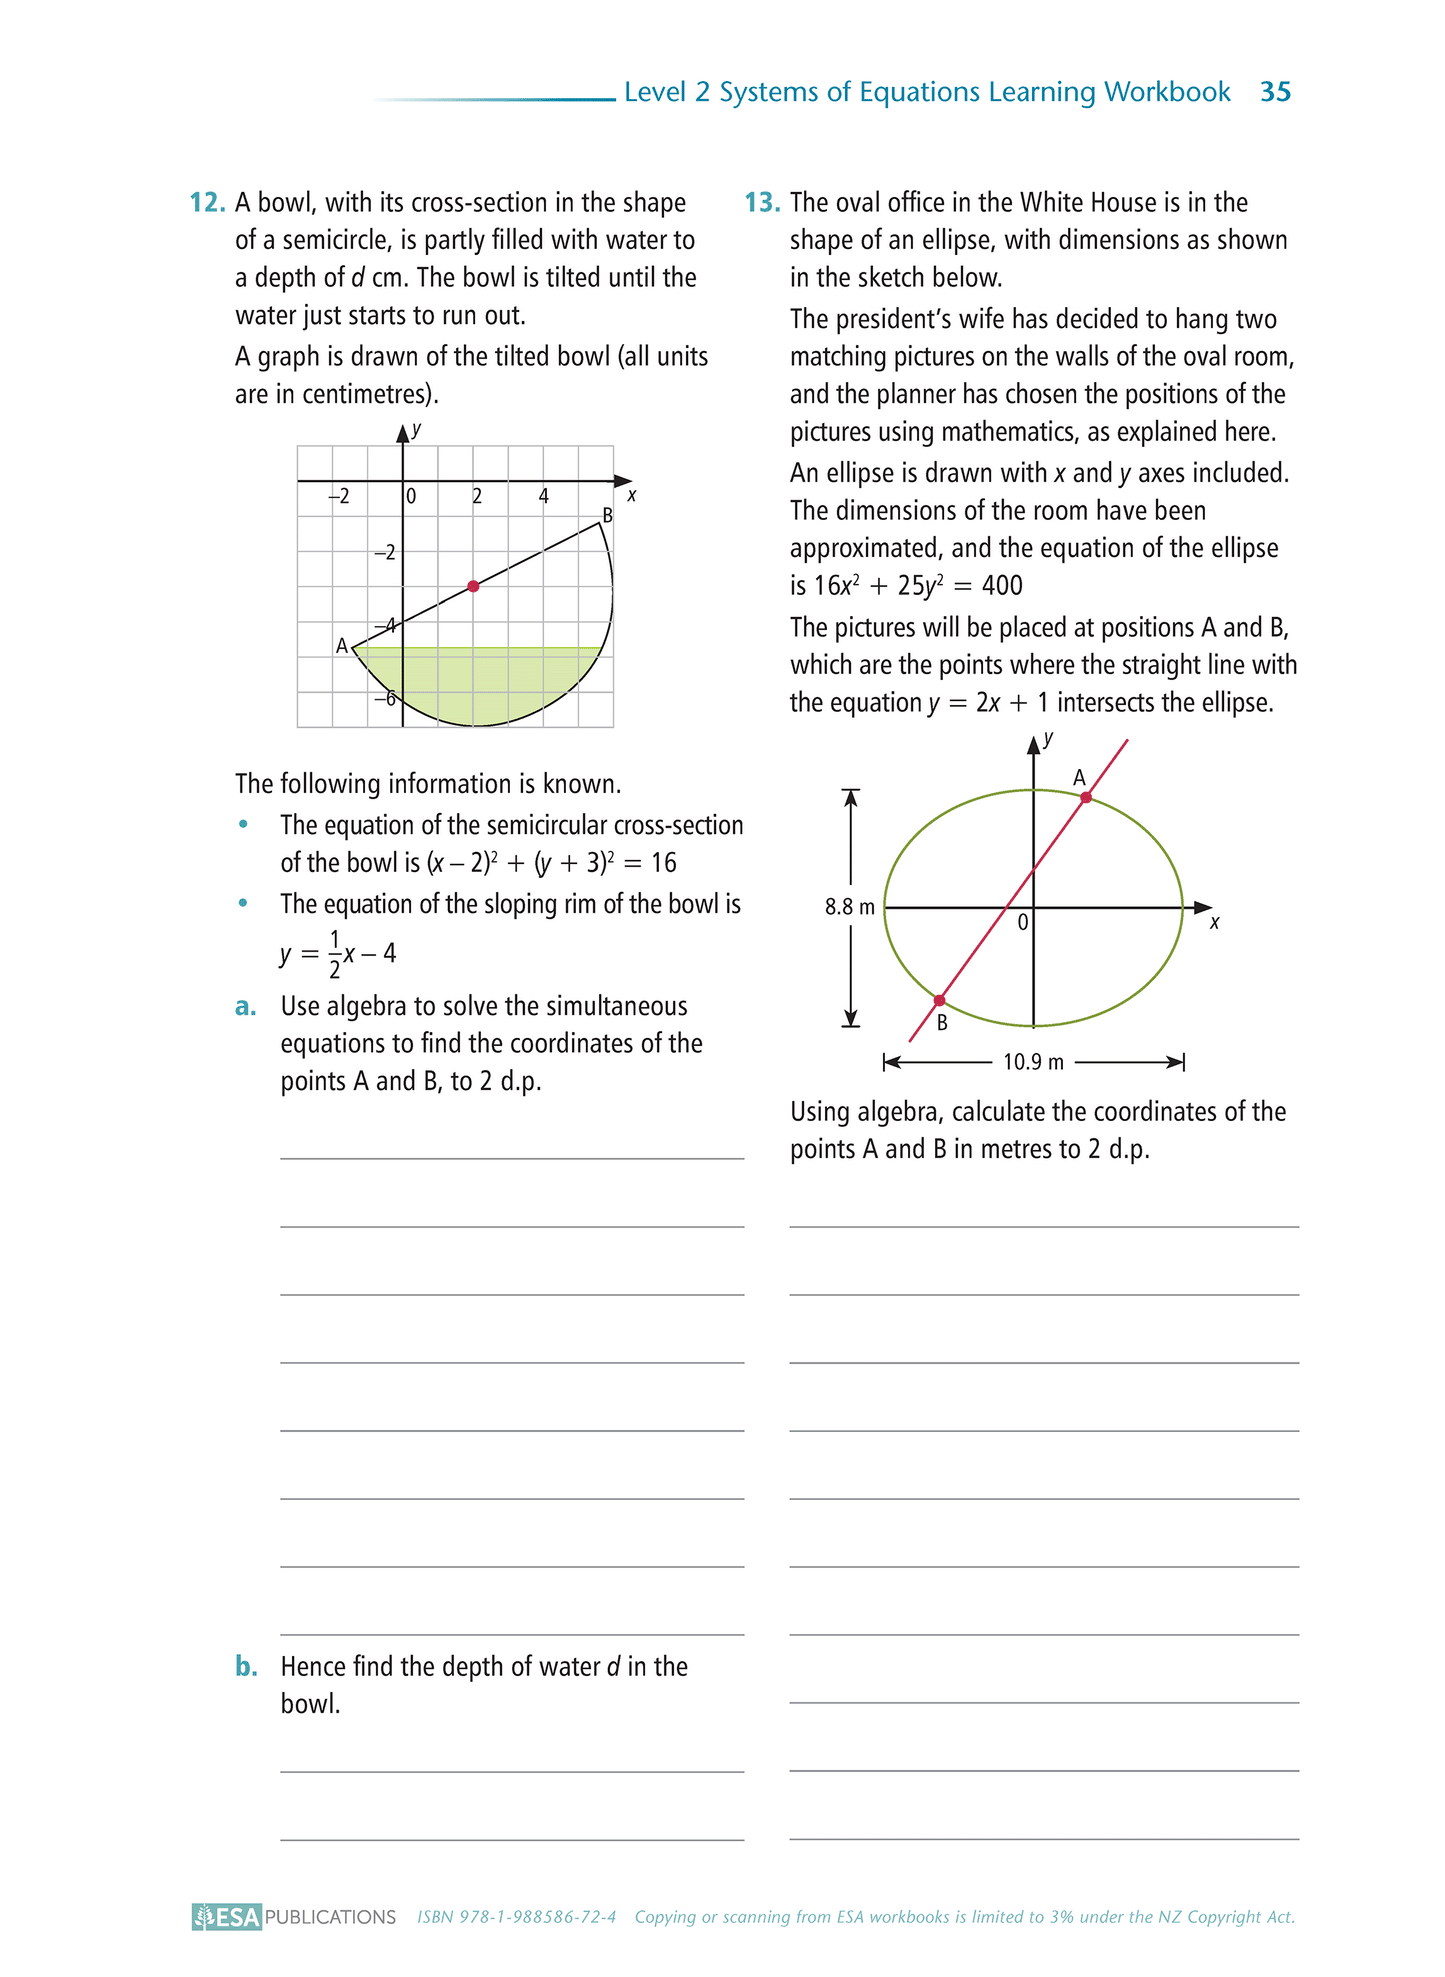 Level 2 Systems of Equations 2.14 Learning Workbook